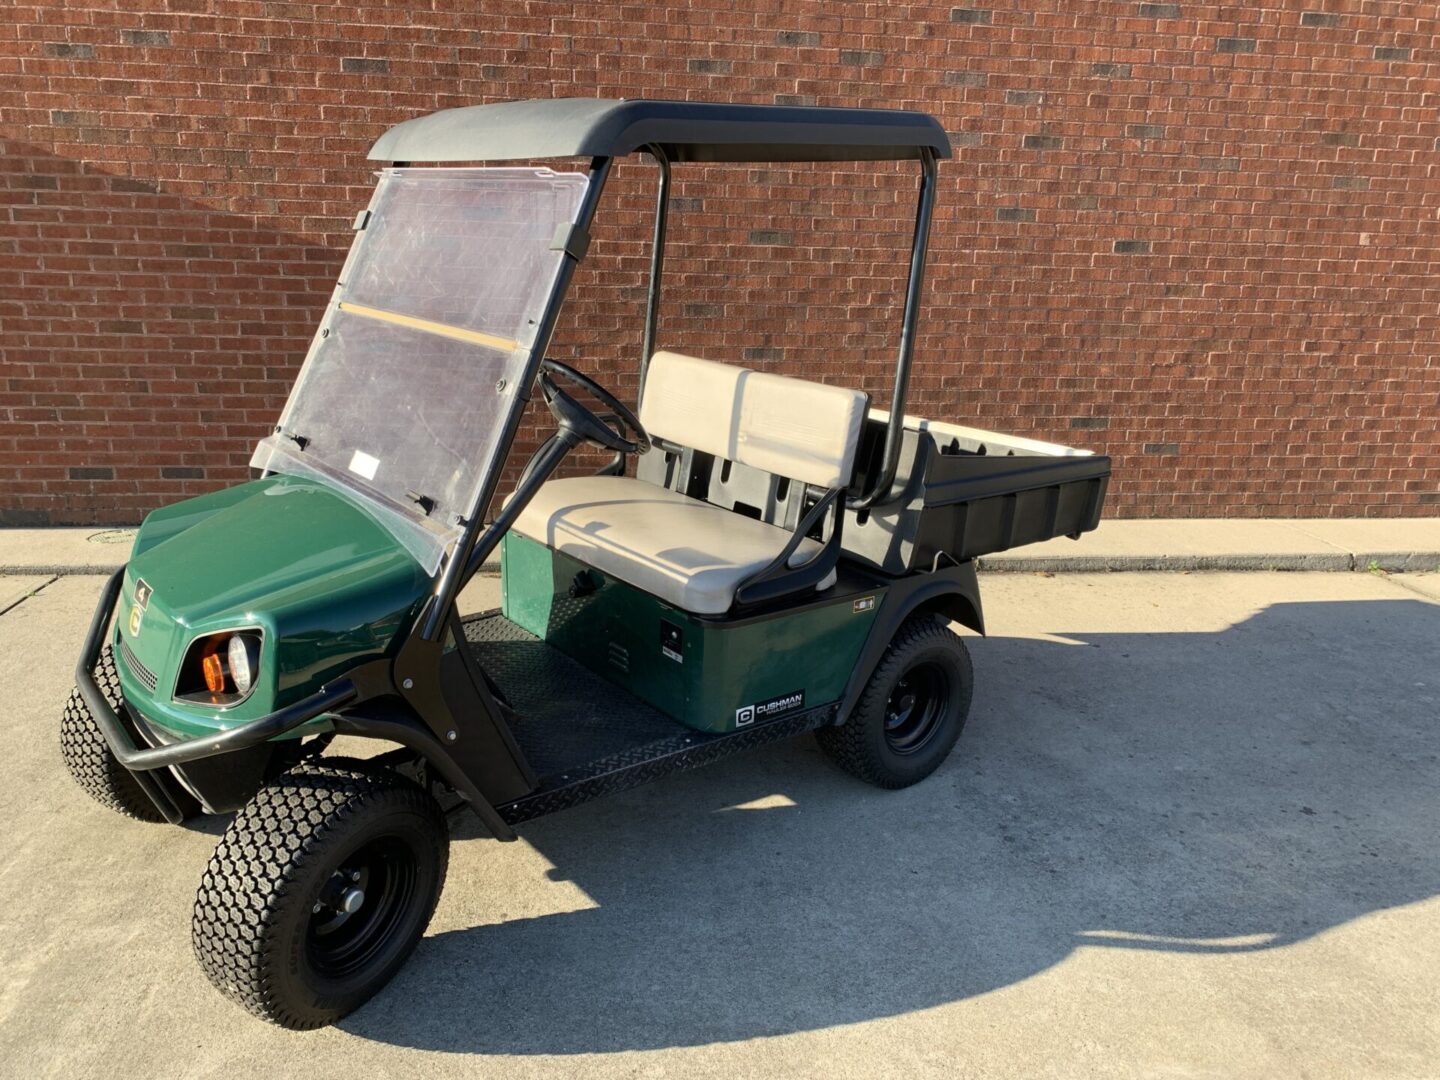 A green golf cart parked in the driveway.